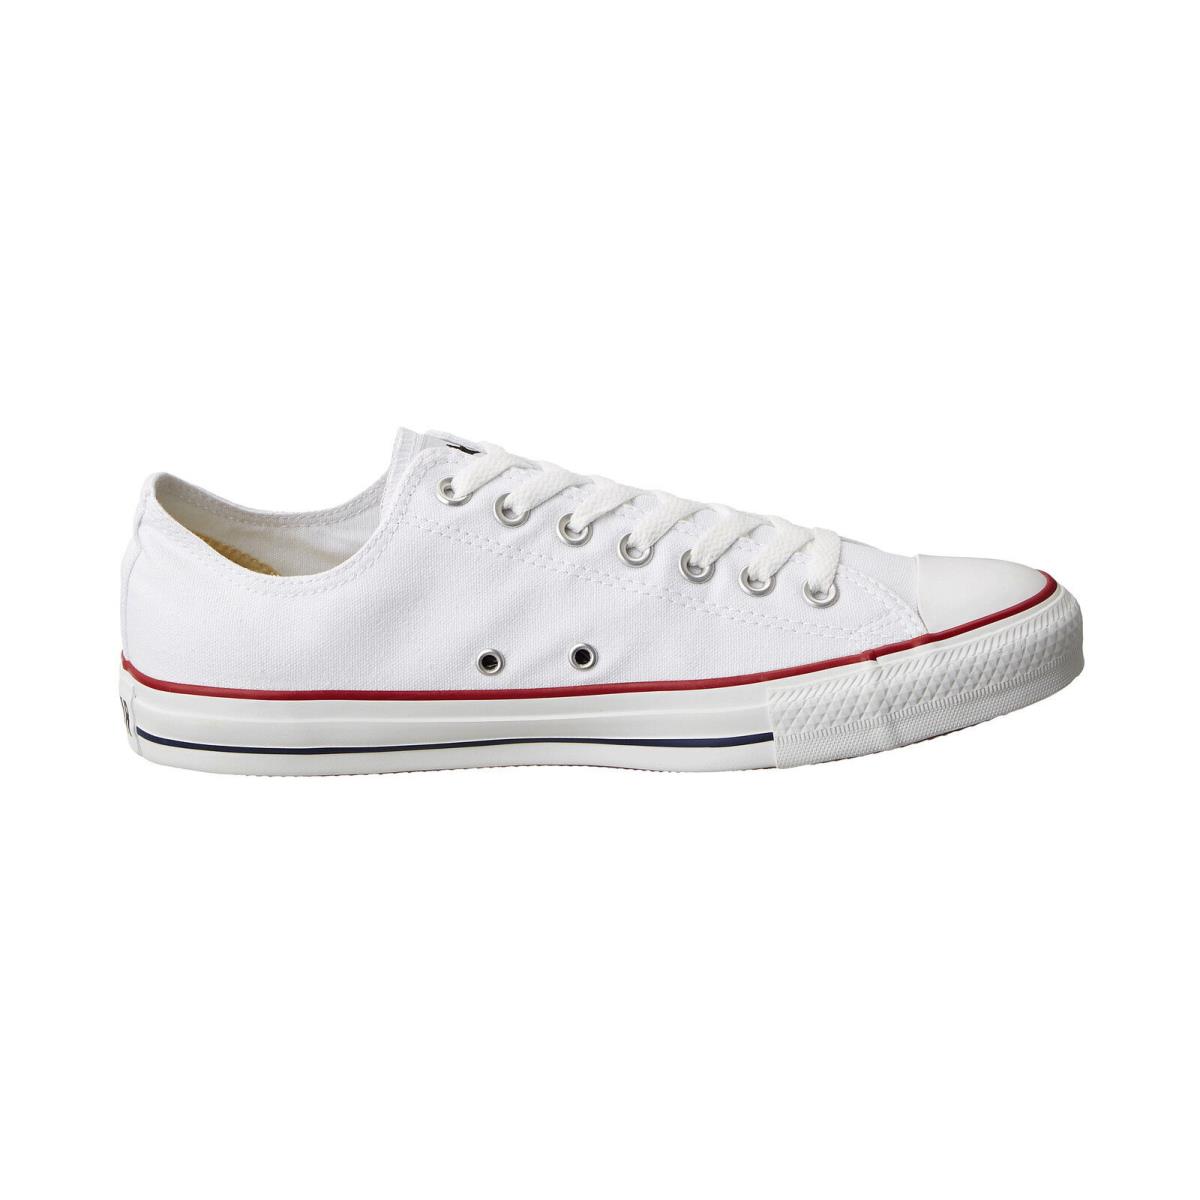 Converse Men Shoes All Star Classic Chuck Taylor Low Top Optical White Sneakers